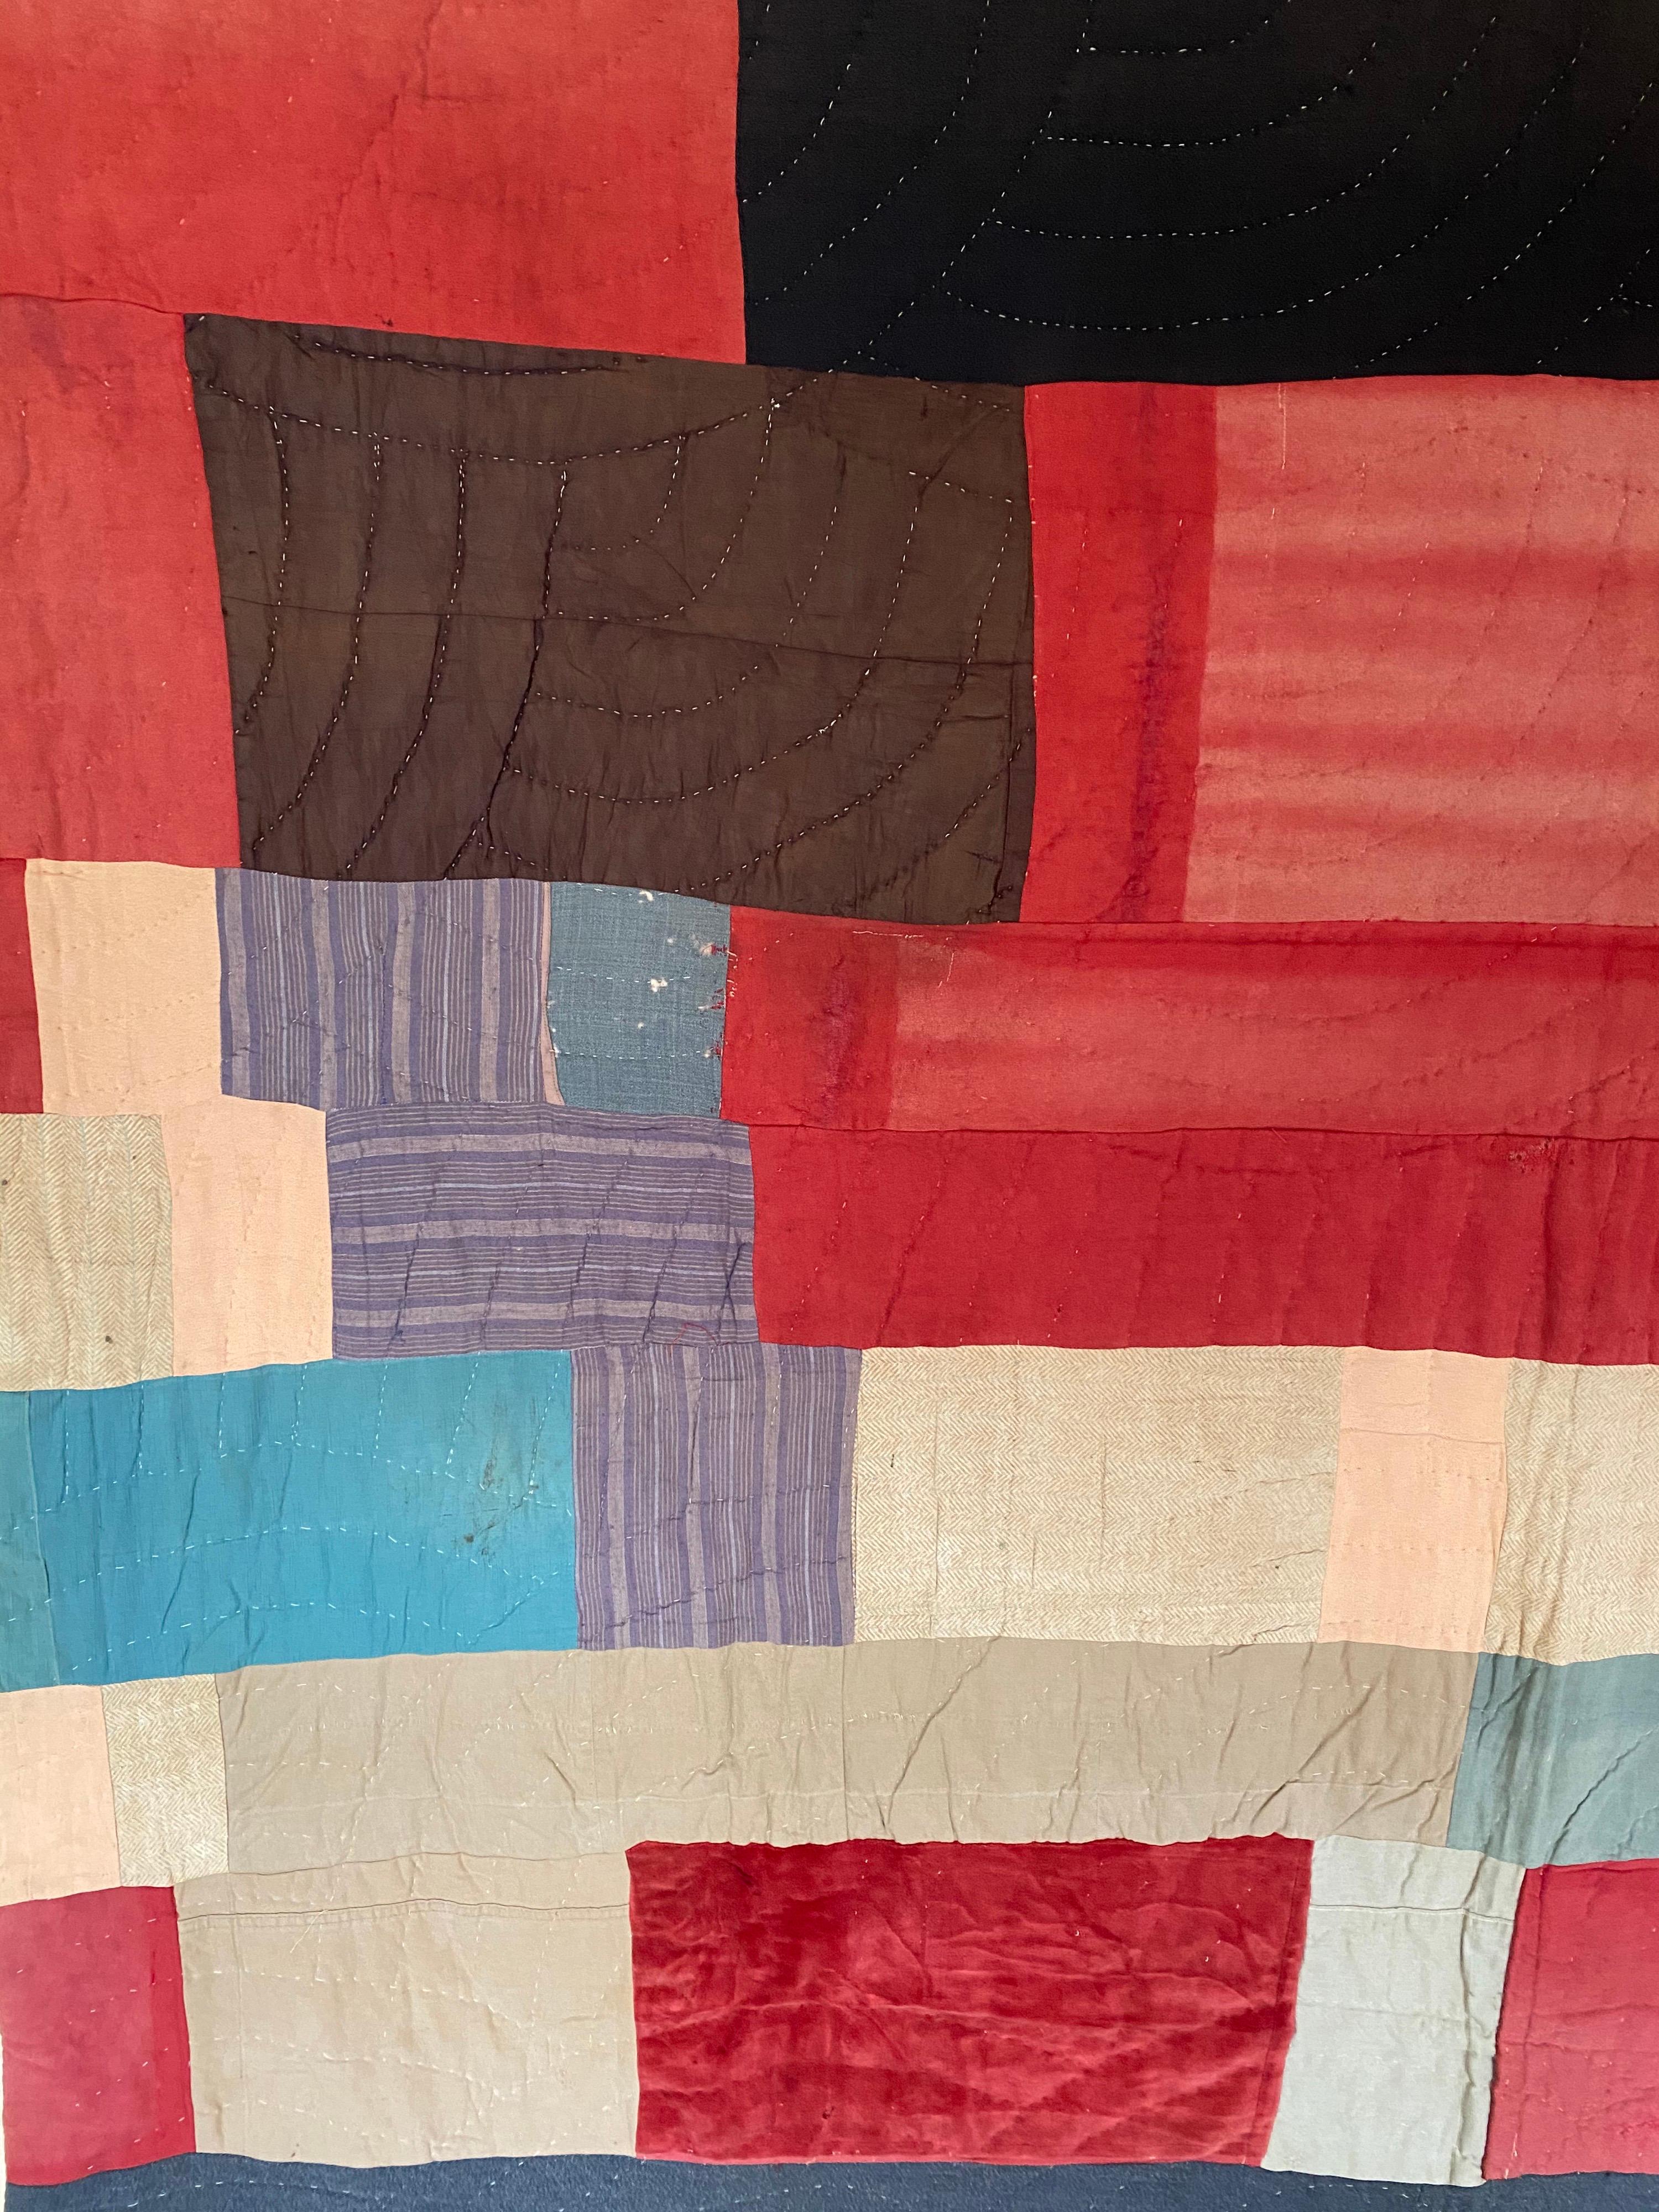 A vintage American early 20th century patchwork quilt. Consisting of primarily red block-work with contrasting shades of blue, cream, and dark grays. Cream colored quilted backing.